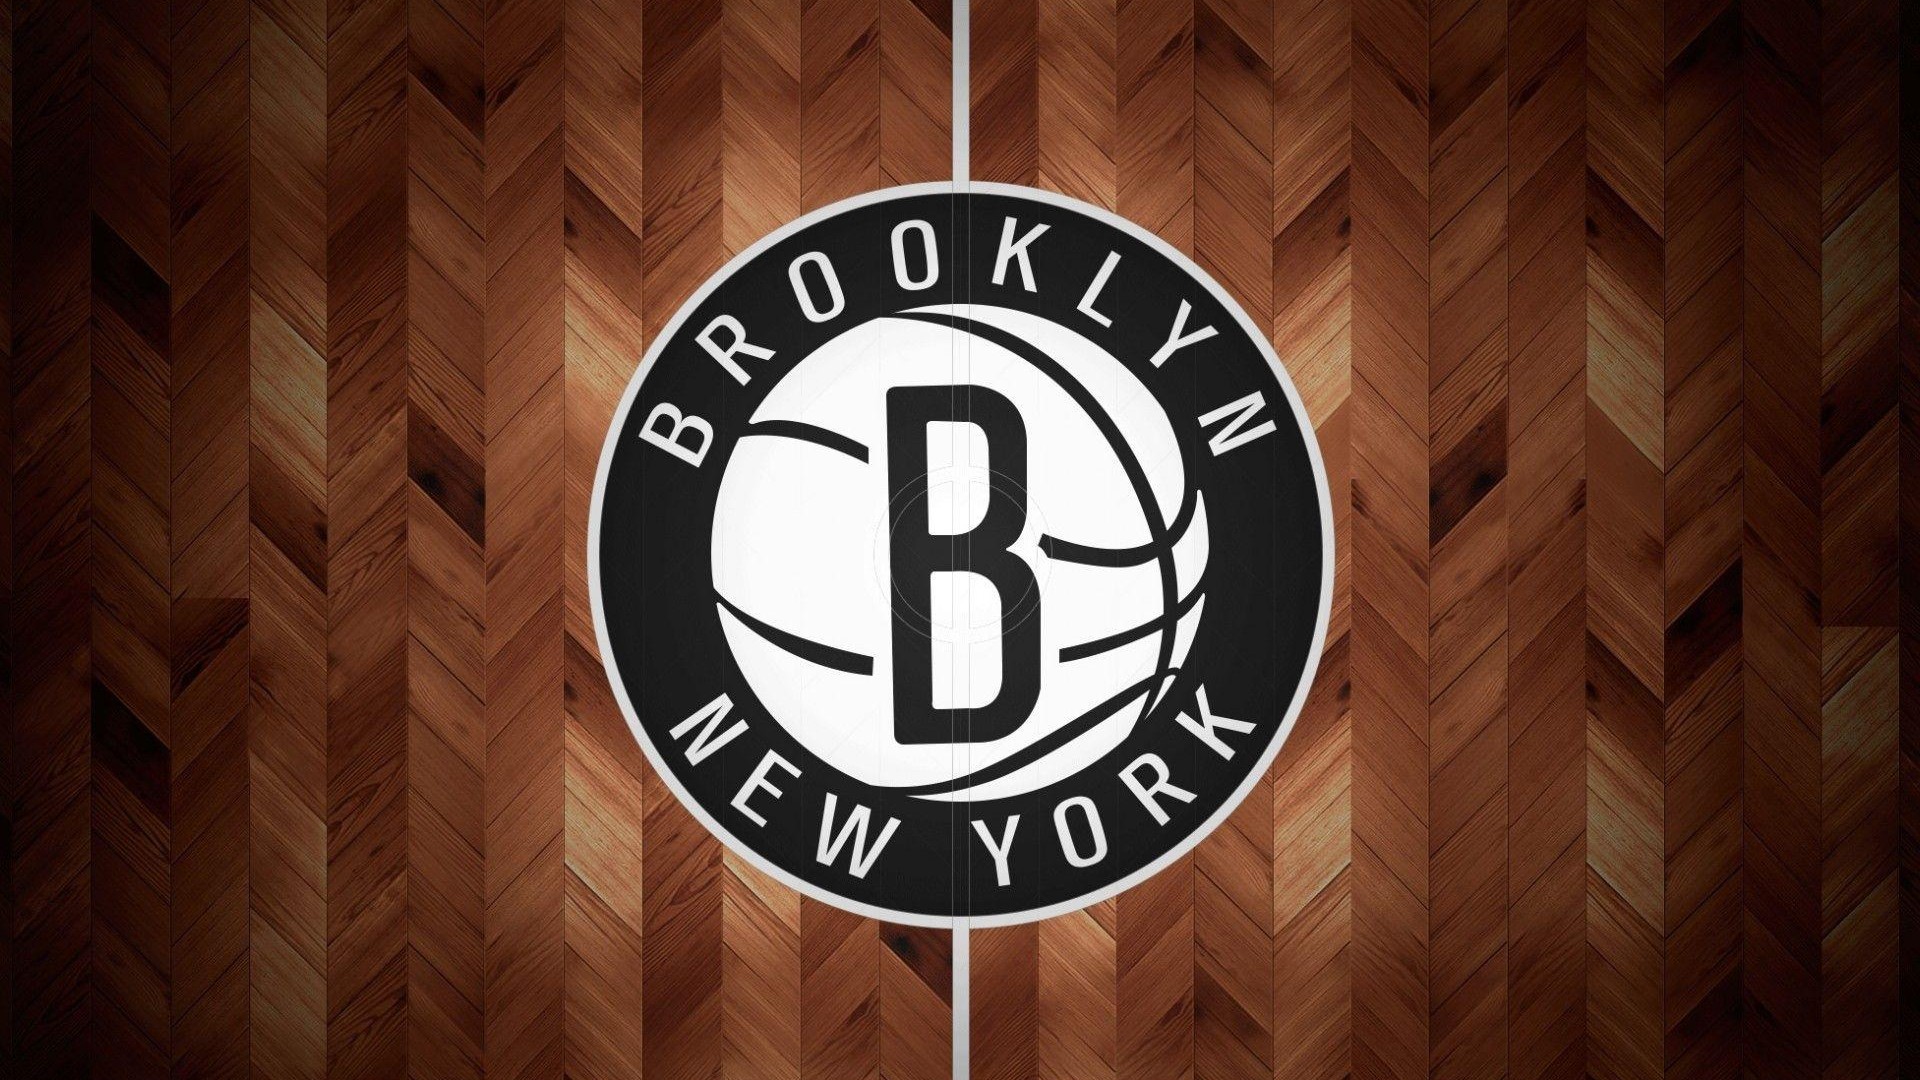 HD Brooklyn Nets Wallpapers with image dimensions 1920X1080 pixel. You can make this wallpaper for your Desktop Computer Backgrounds, Windows or Mac Screensavers, iPhone Lock screen, Tablet or Android and another Mobile Phone device